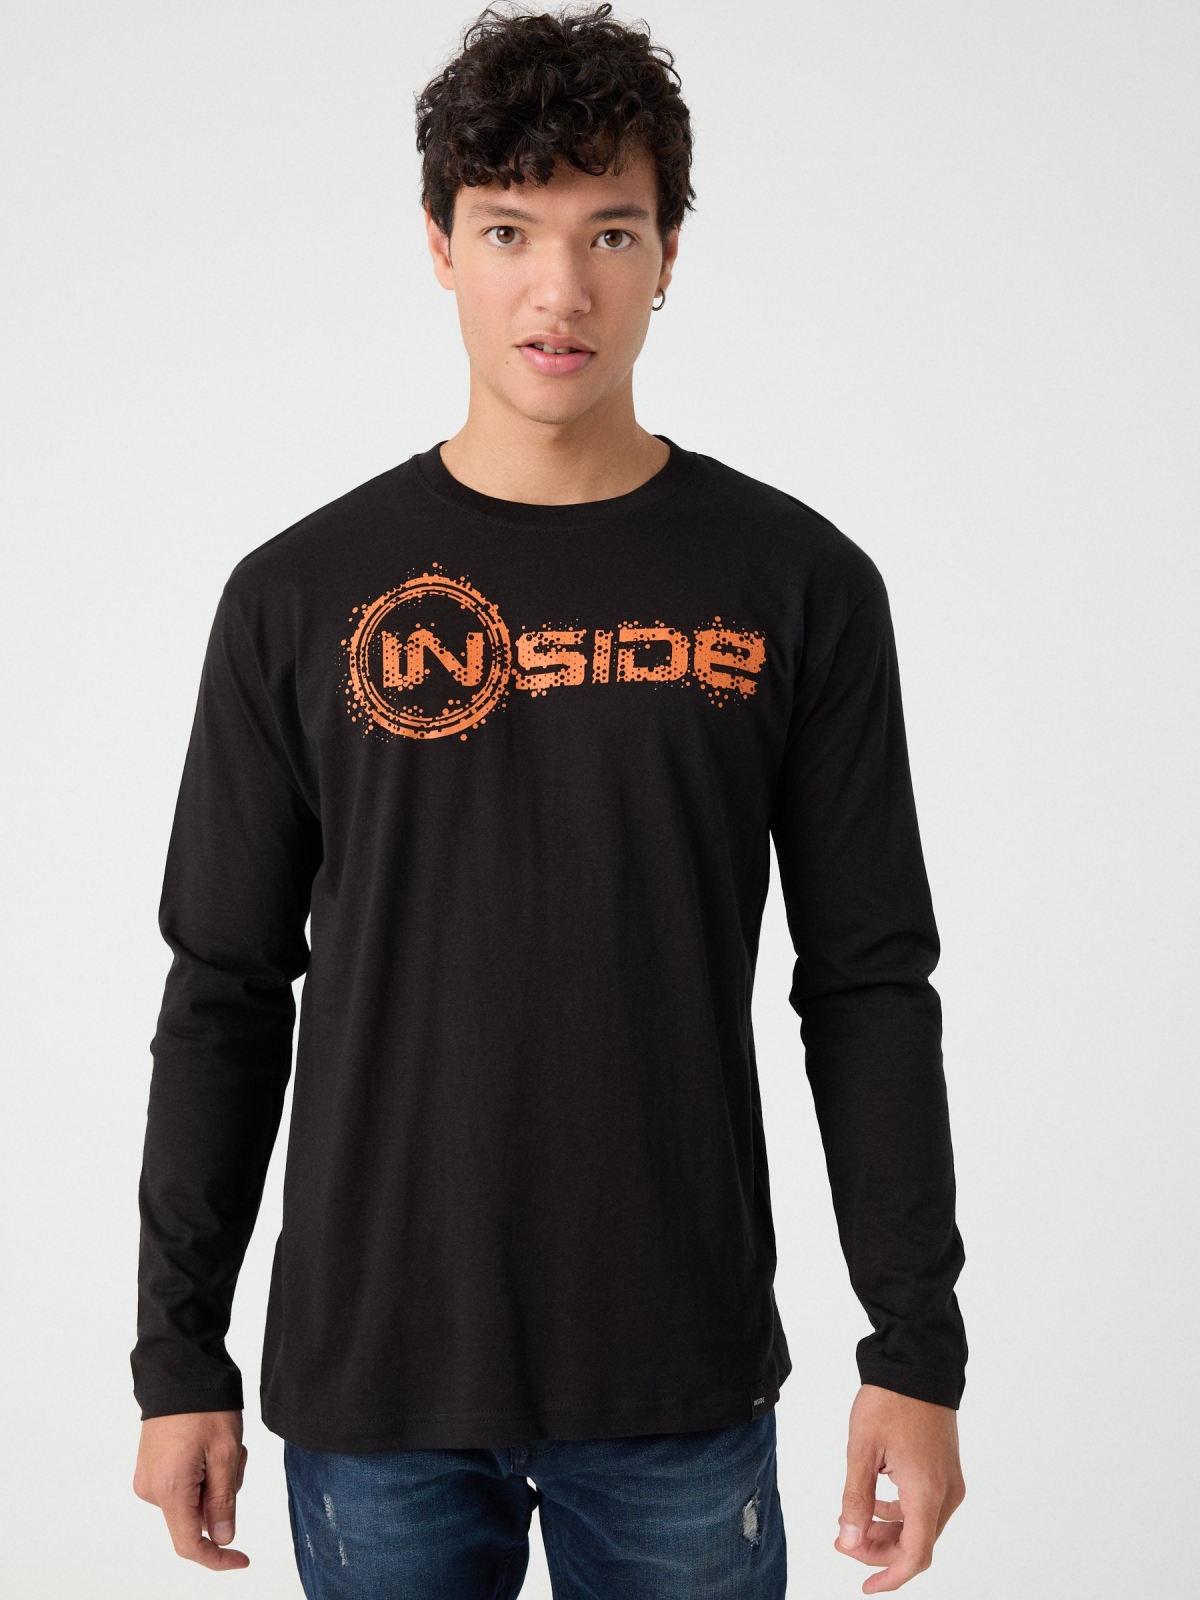 Inside print t-shirt black middle front view